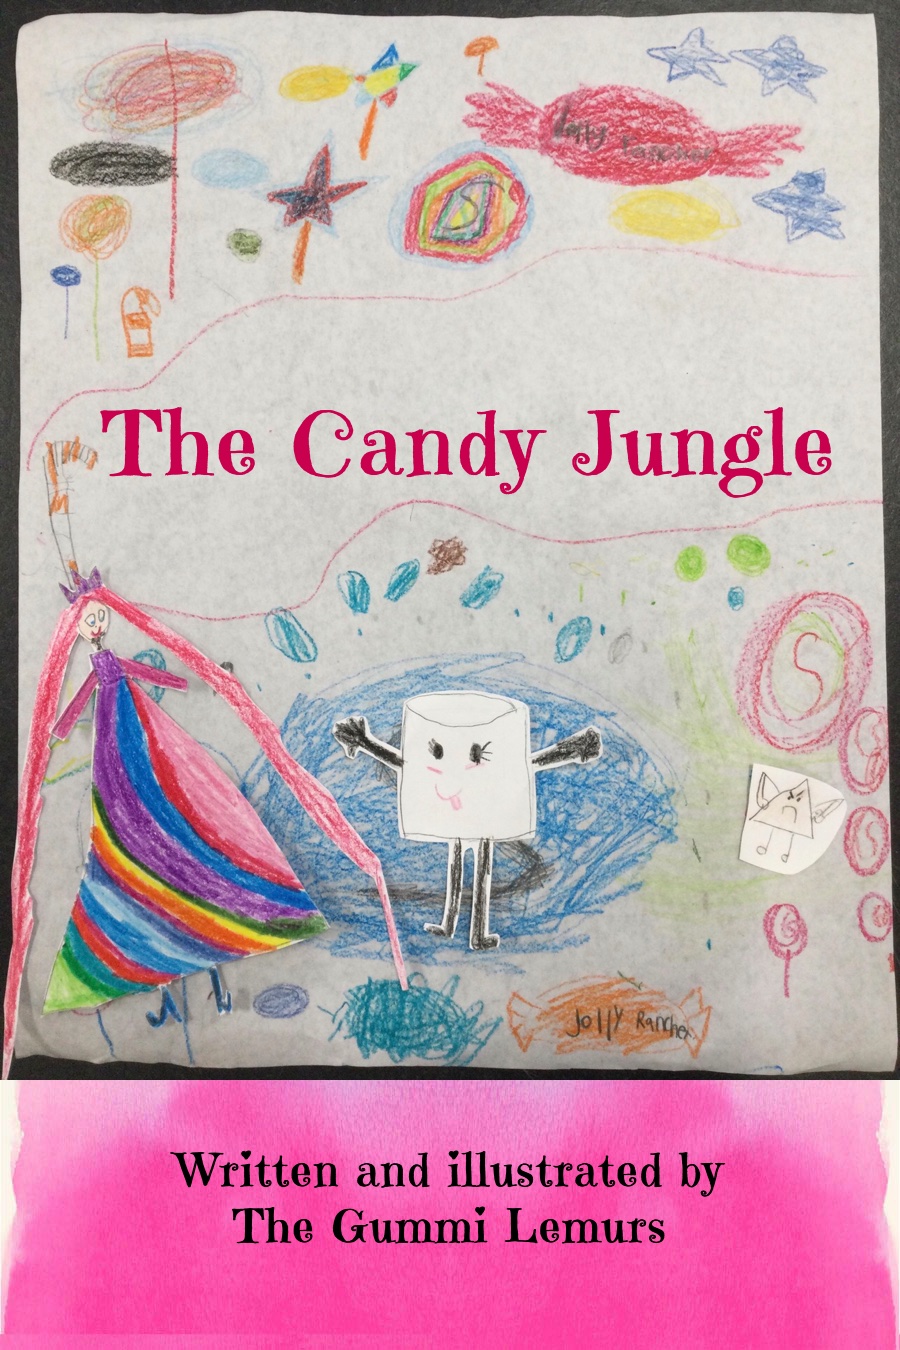 The Candy Jungle by Hillsborough – July 25 – 1st Grade